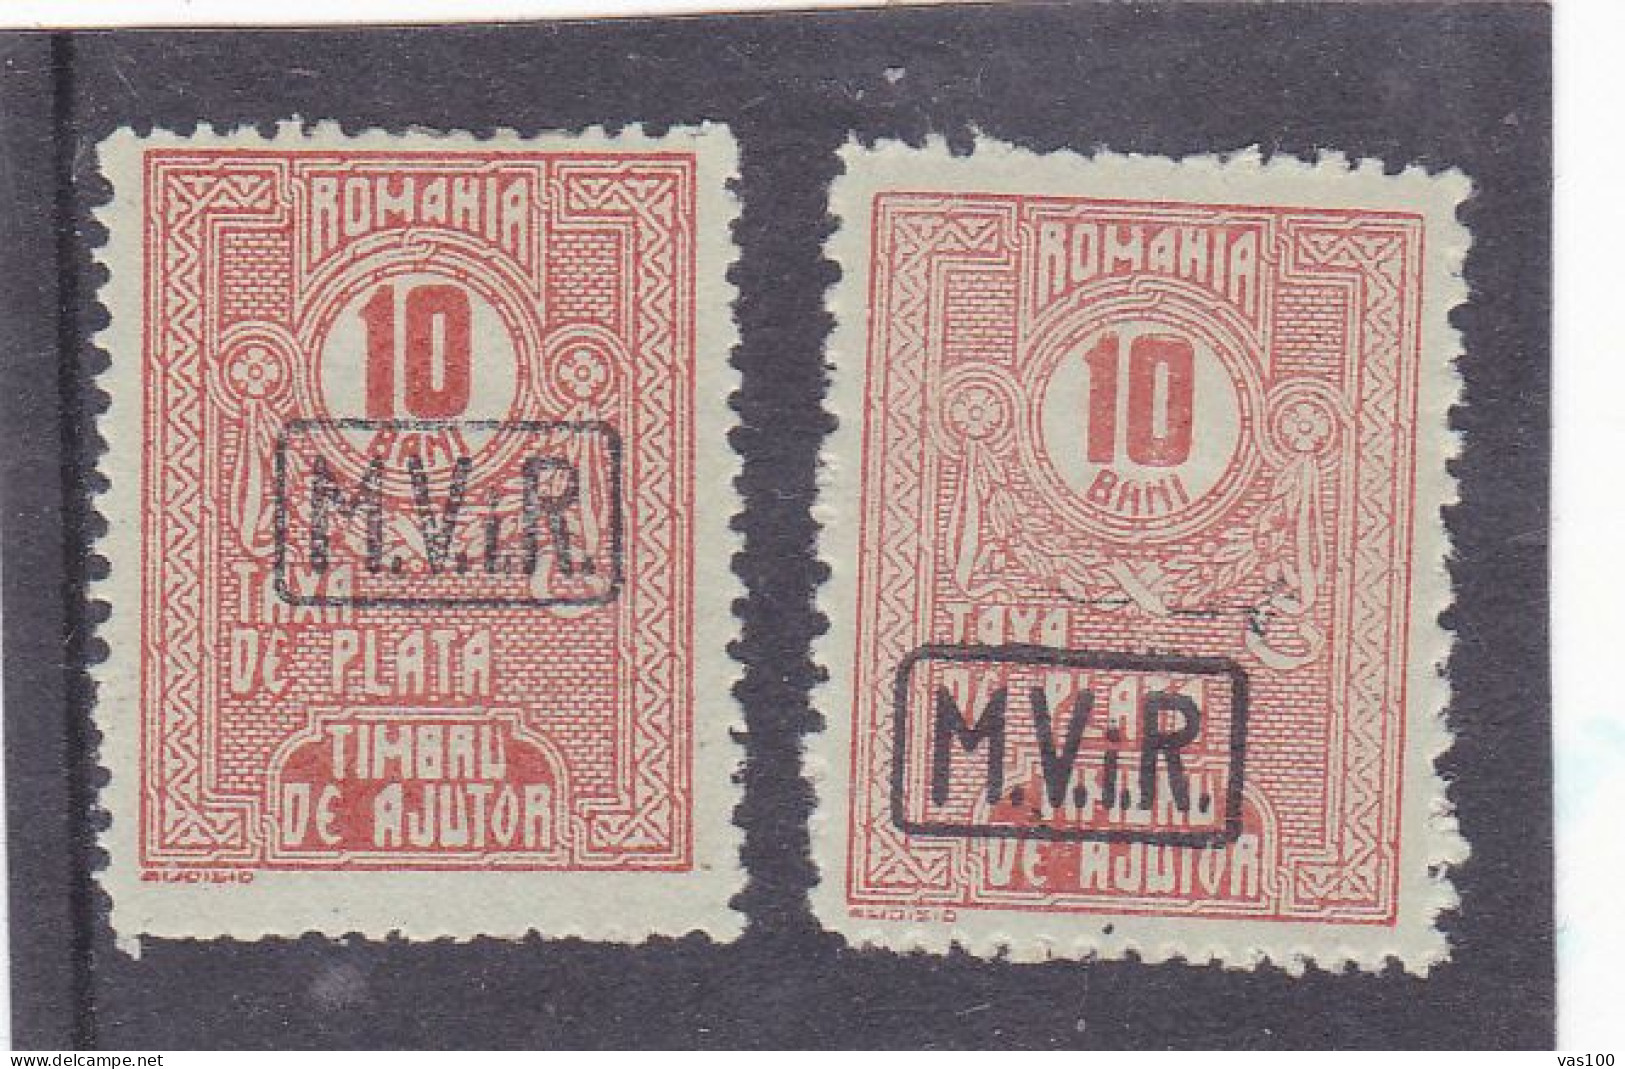 Germany WW1 Occupation In Romania 1917 MViR 10 BANI 2 STAMPS POSTAGE DUE MINT - Ocupaciones